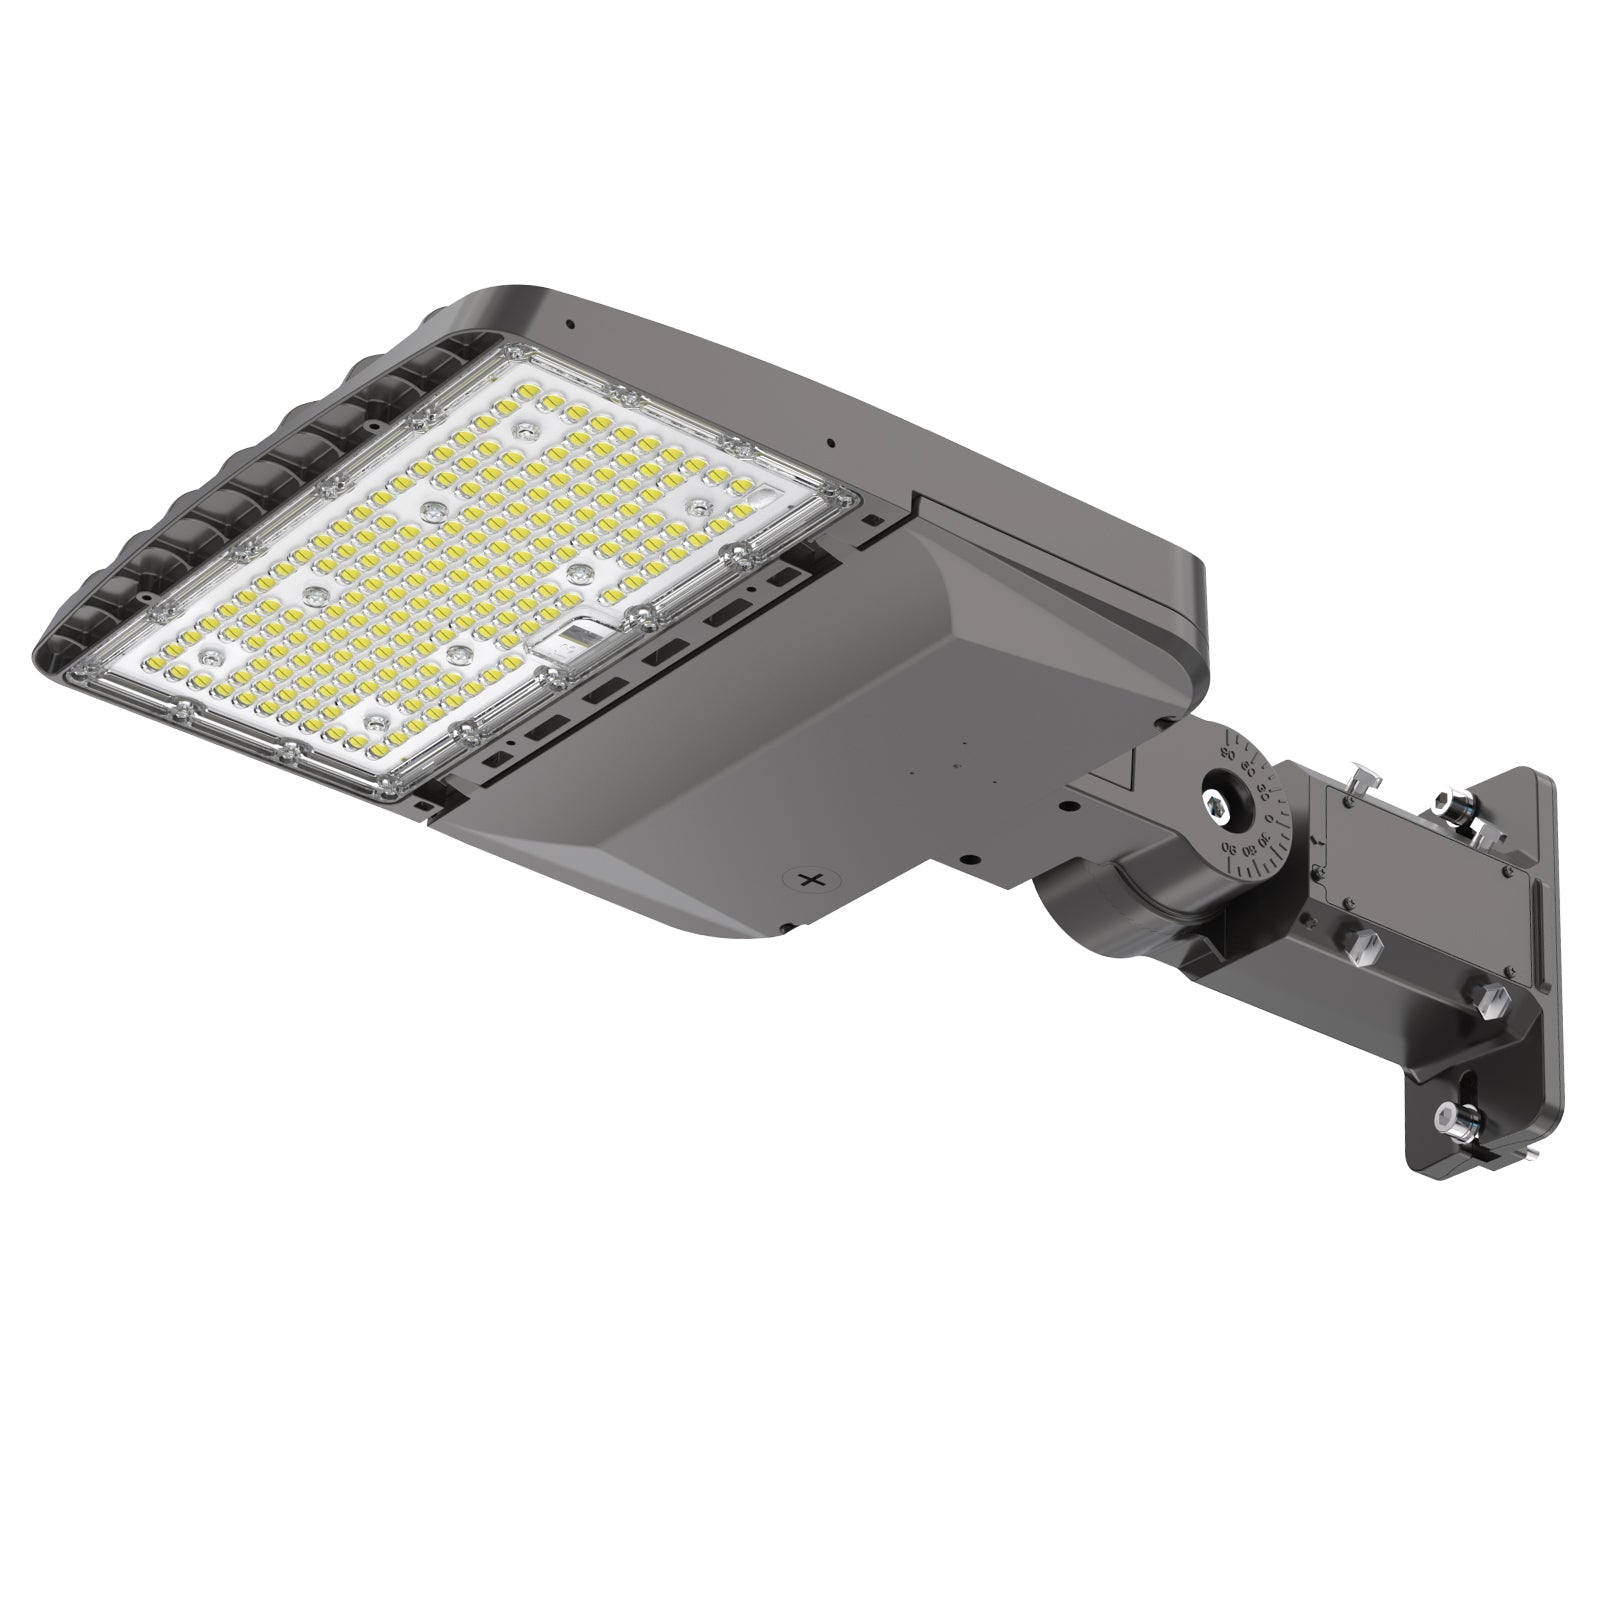 XALH Series Area Light - Without Shortcap, AC 120V-277V, 80W-310W, Selectable Wattage